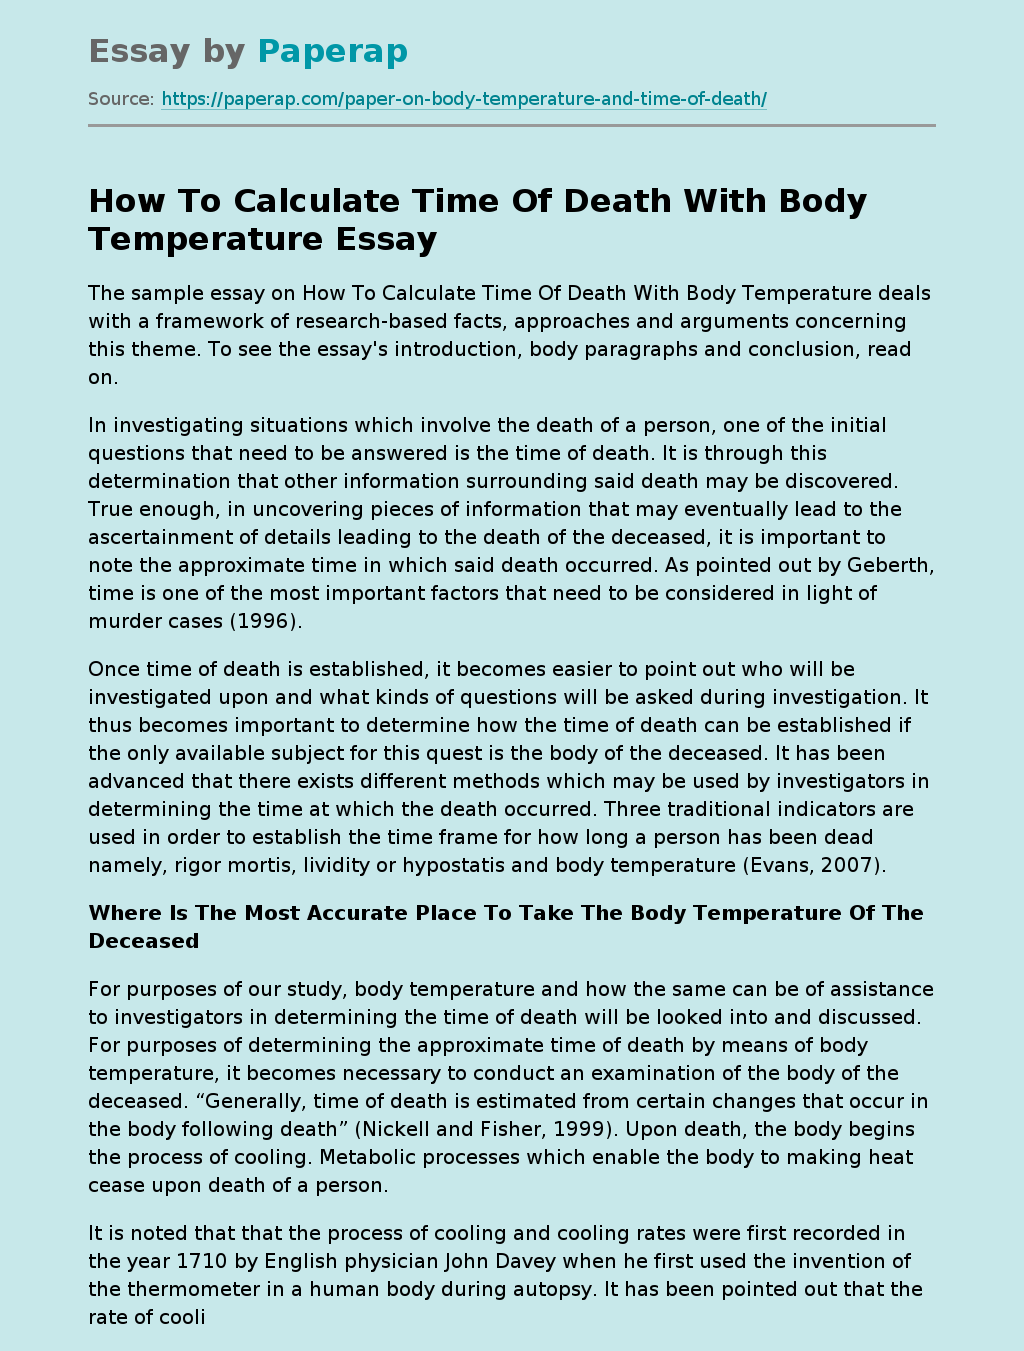 How To Calculate Time Of Death With Body Temperature